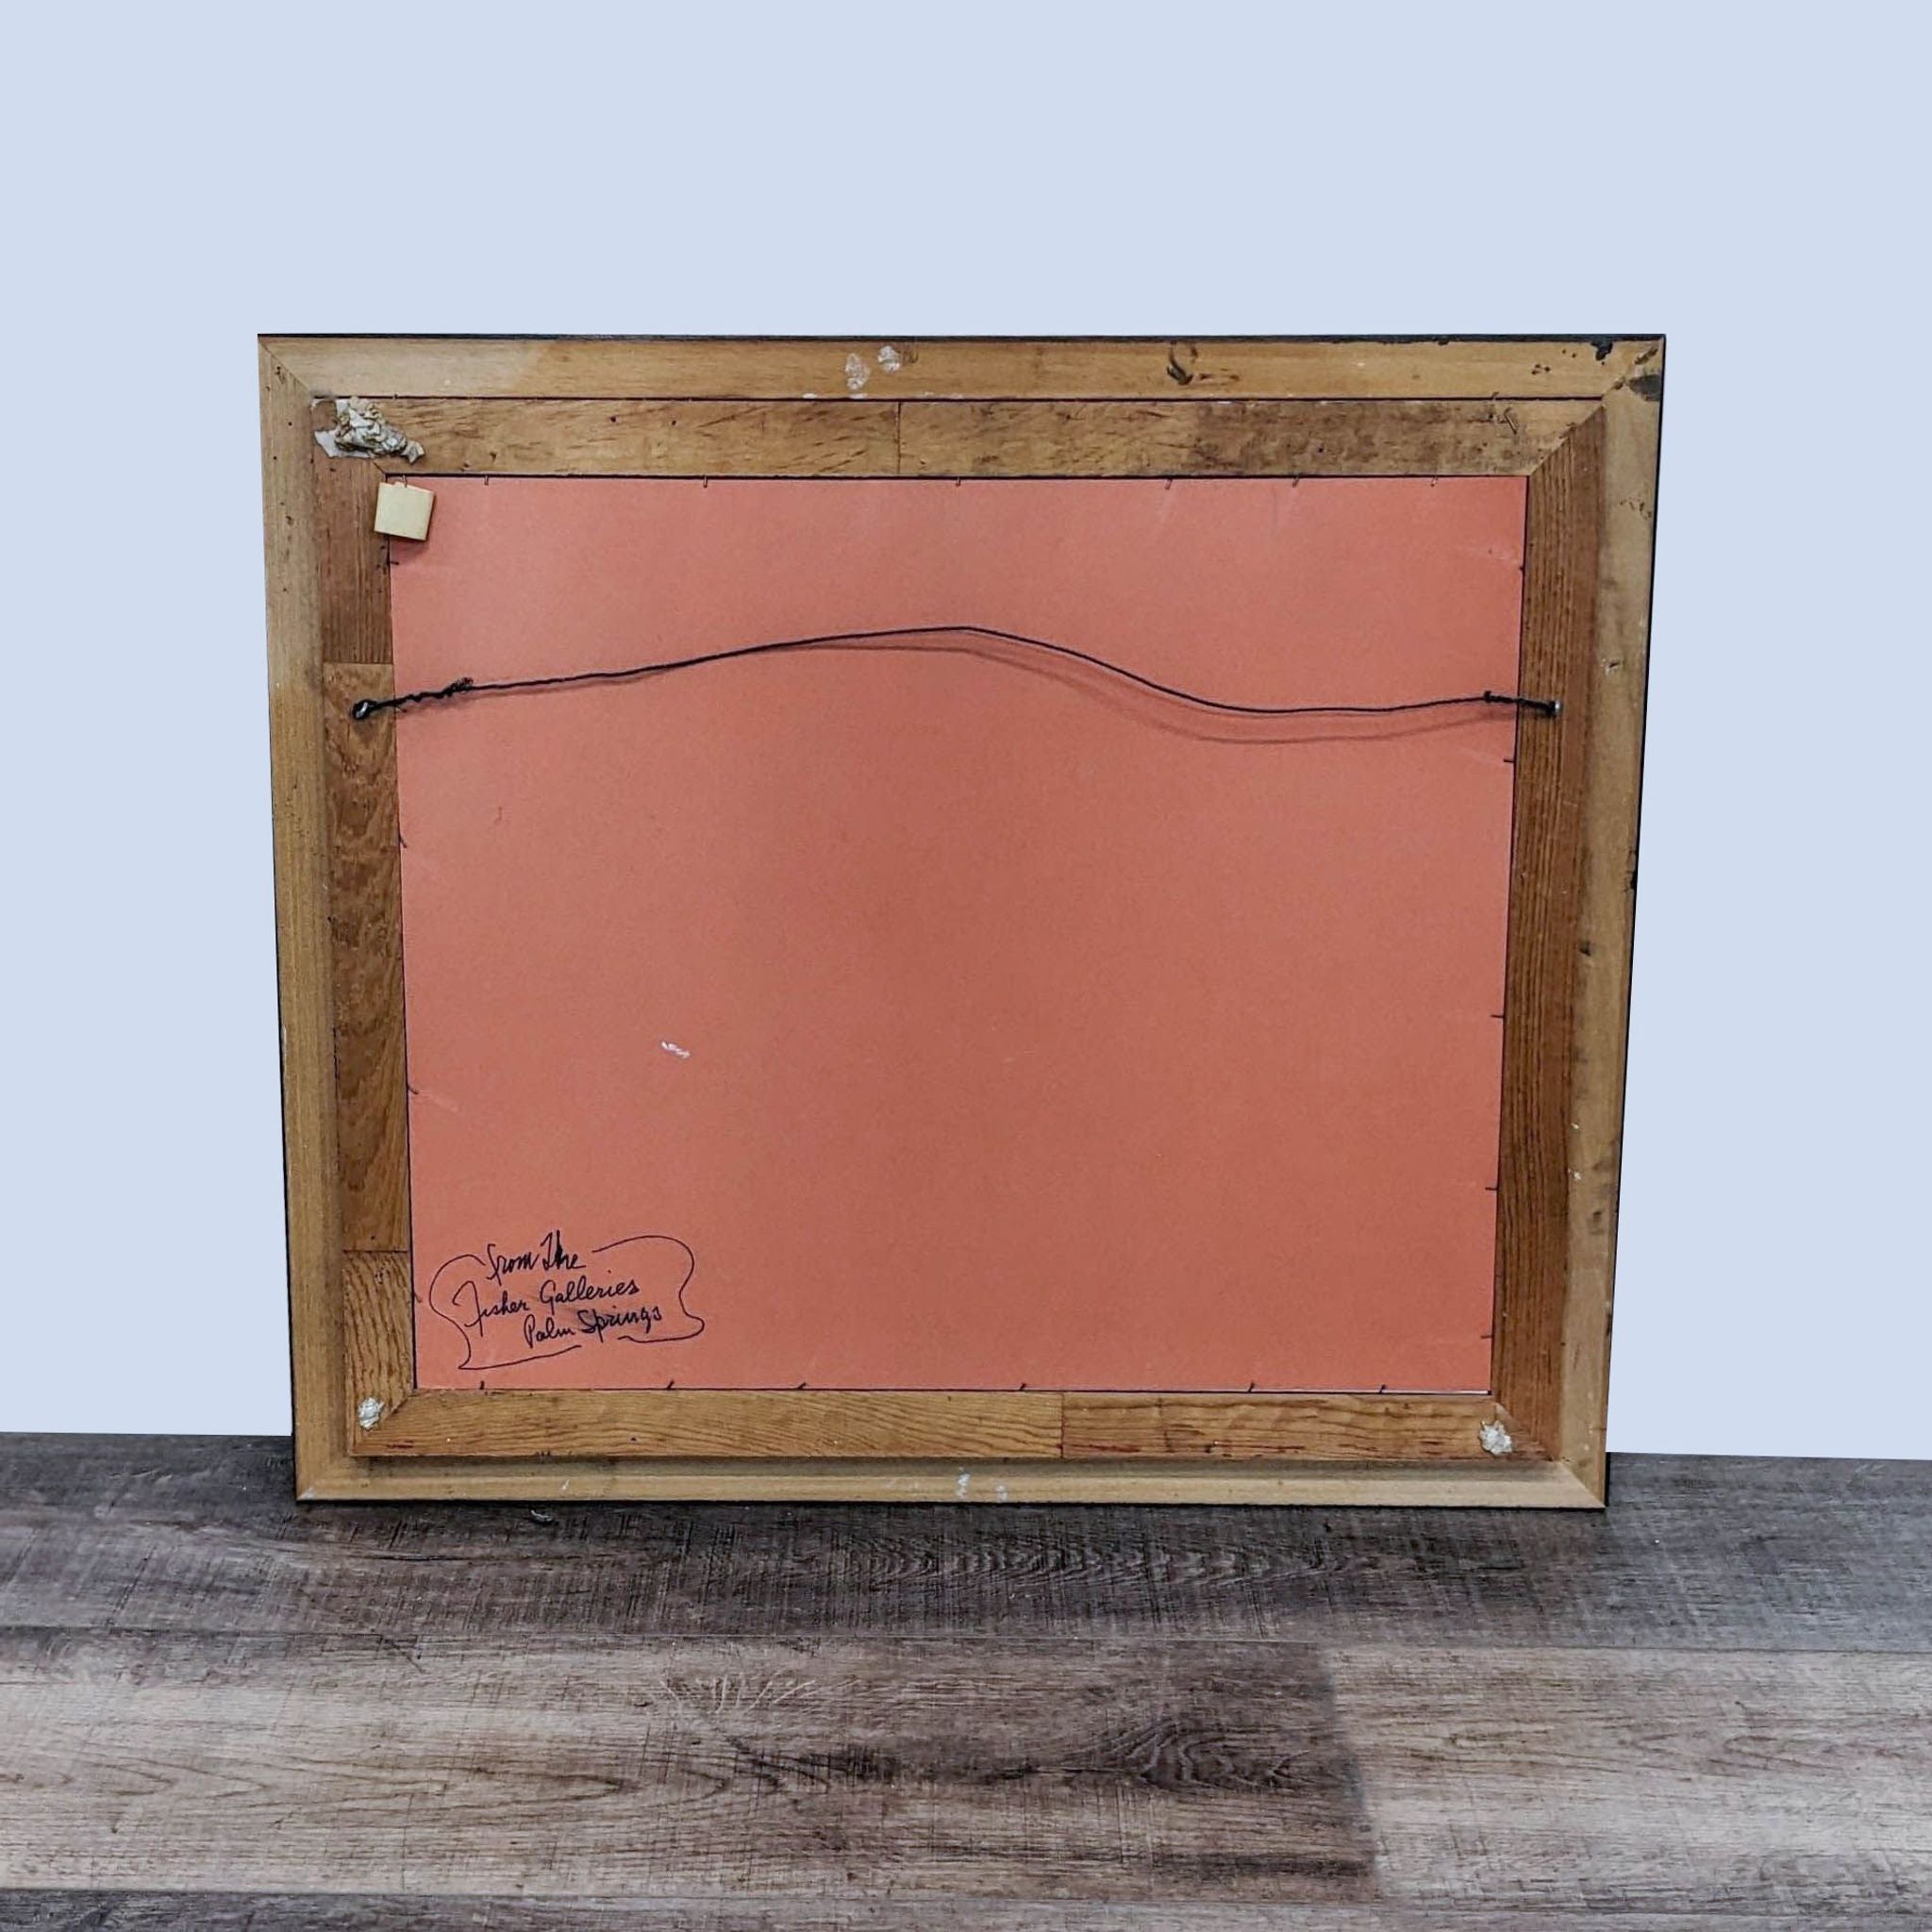 Rear view of a framed Reperch watercolor print showing the backboard with gallery label, wire, and wooden frame.